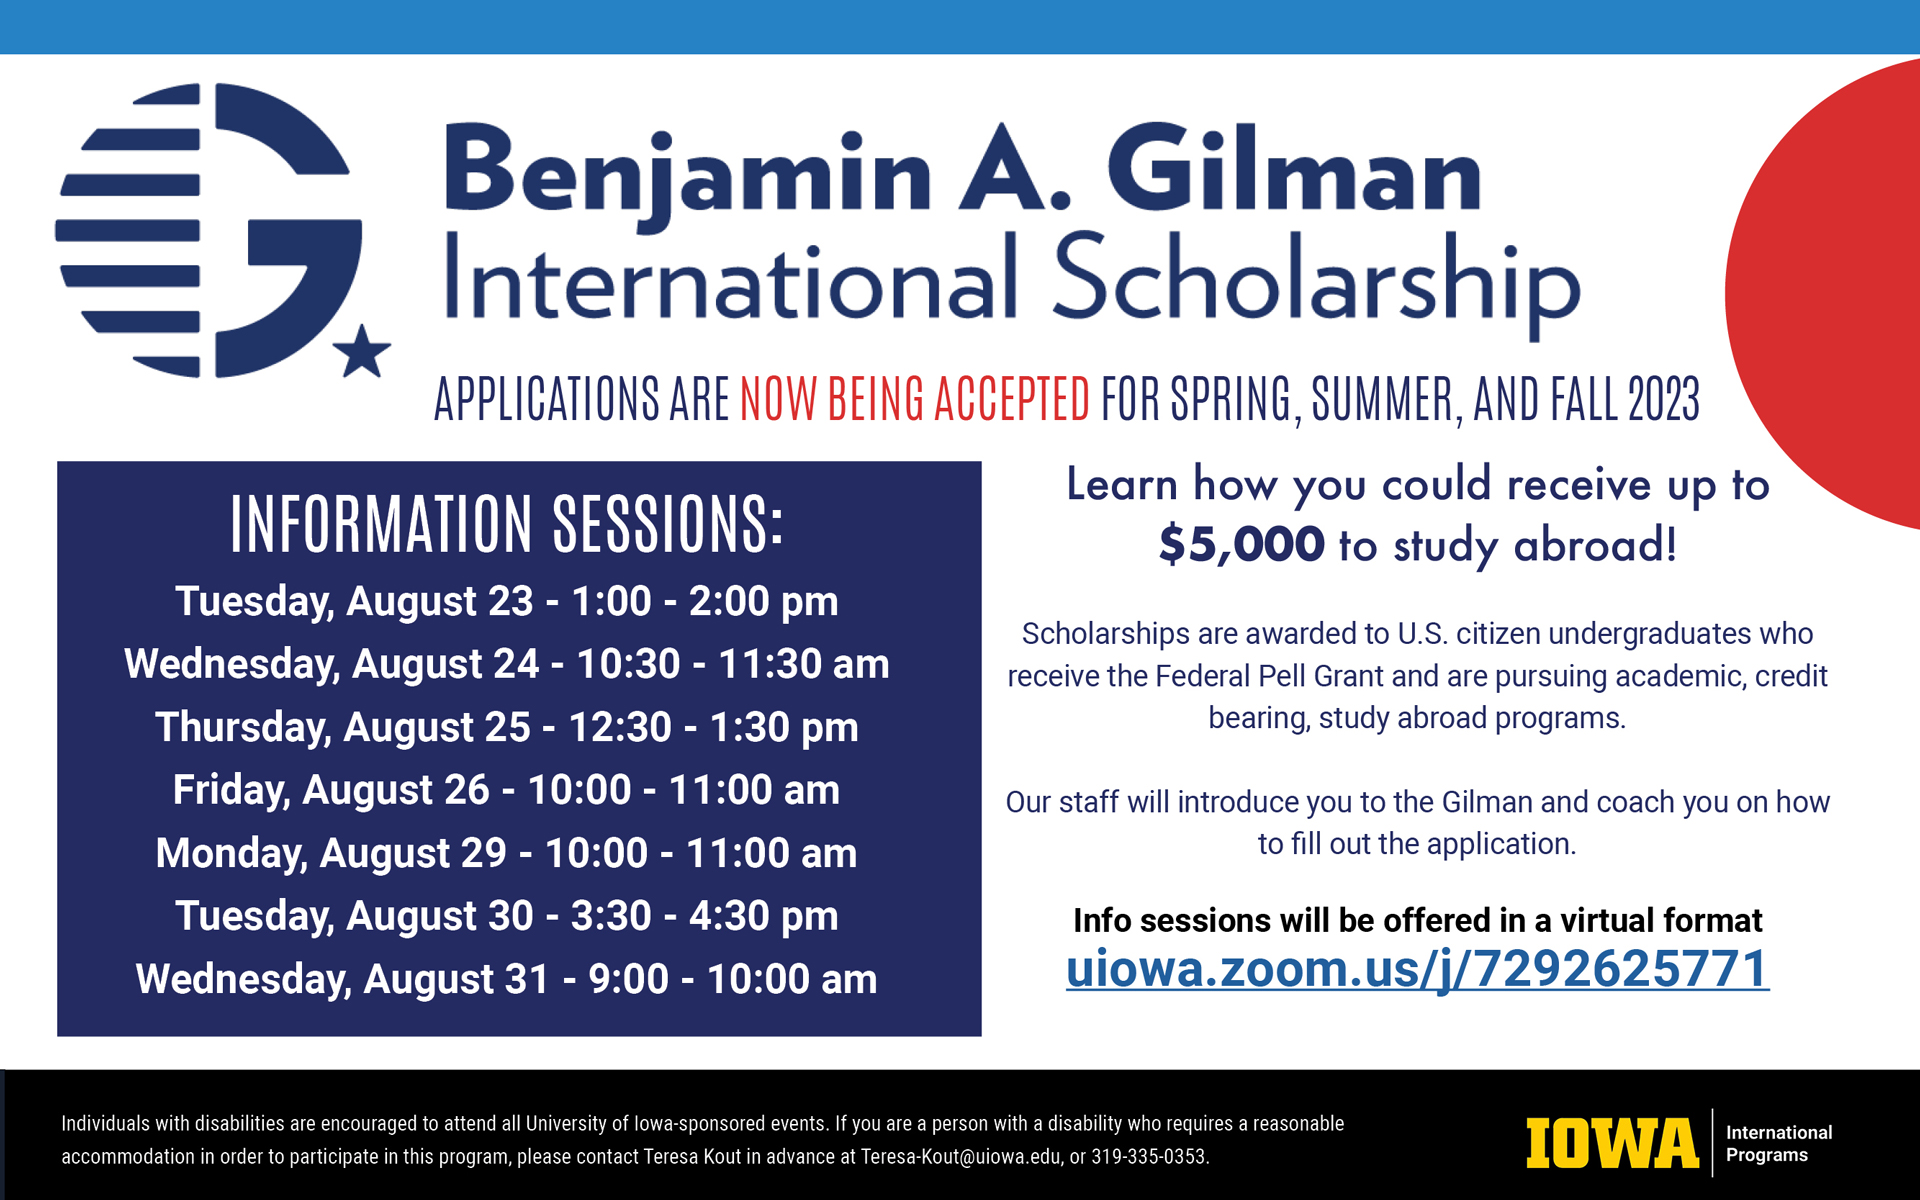 Benjamin A. Gilman International Scholarship. Applications are now being accepted for Spring, Summer, and Fall 2023. Learn how you could receive up to $5,000 to study aboard! Scholarships are awarded to U.S. citizen undergraduates who receive the Federal Pell Grant and are pursuing academic, credit bearing, study aboard programs. Our staff will introduce you to the Gilman and coach you on how to fill out the application. Info sessions will be offered in a virtual format, uiowa.zoom.us/j/7292625771. Information sessions: Tuesday, August 23, 1 - 2 p.m., Wednesday, August 24, 10:30 - 11:30 a.m., Thursday, August 25, 12:30 - 1:30 p.m., Friday, August 26, 10 - 11 a.m., Monday, August 29, 10 - 11 a.m., Tuesday, August 30, 3:30 - 4:30 p.m., Wednesday, August 31, 9 - 10 a.m. Individuals with disabilities are encouraged to attend all University of Iowa-sponsored events. If you are a person with a disability who requires a reasonable accommodation in order to participate in this program, please contact Teresa Kout in advance at teresa-kout@uiowa.edu or 319-335-0353. 